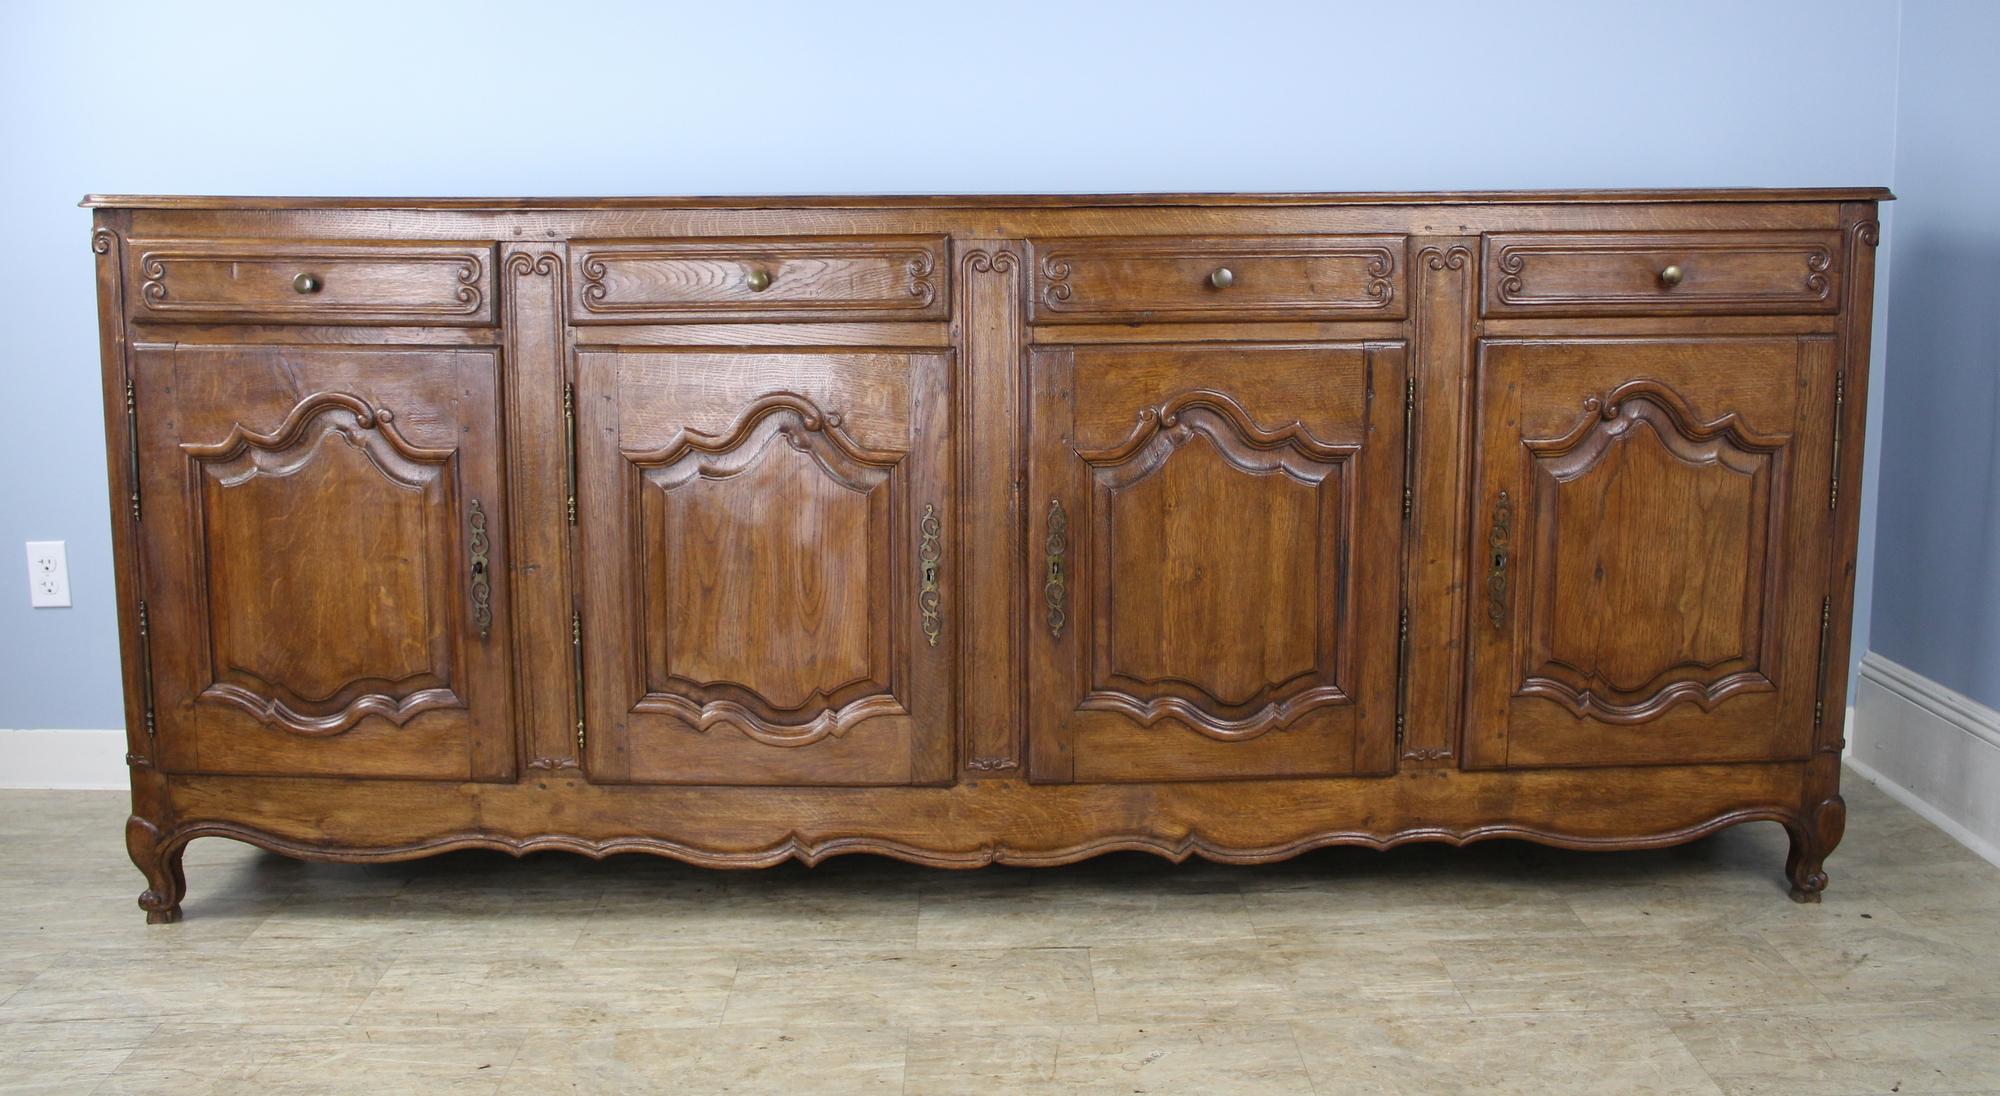 A large French chestnut buffet or enfilade, grand in both scale and sensibility. Carved detail on both the door panels and the drawers and snail feet to complete the look. The interior and the top are both clean and in very good condition. One